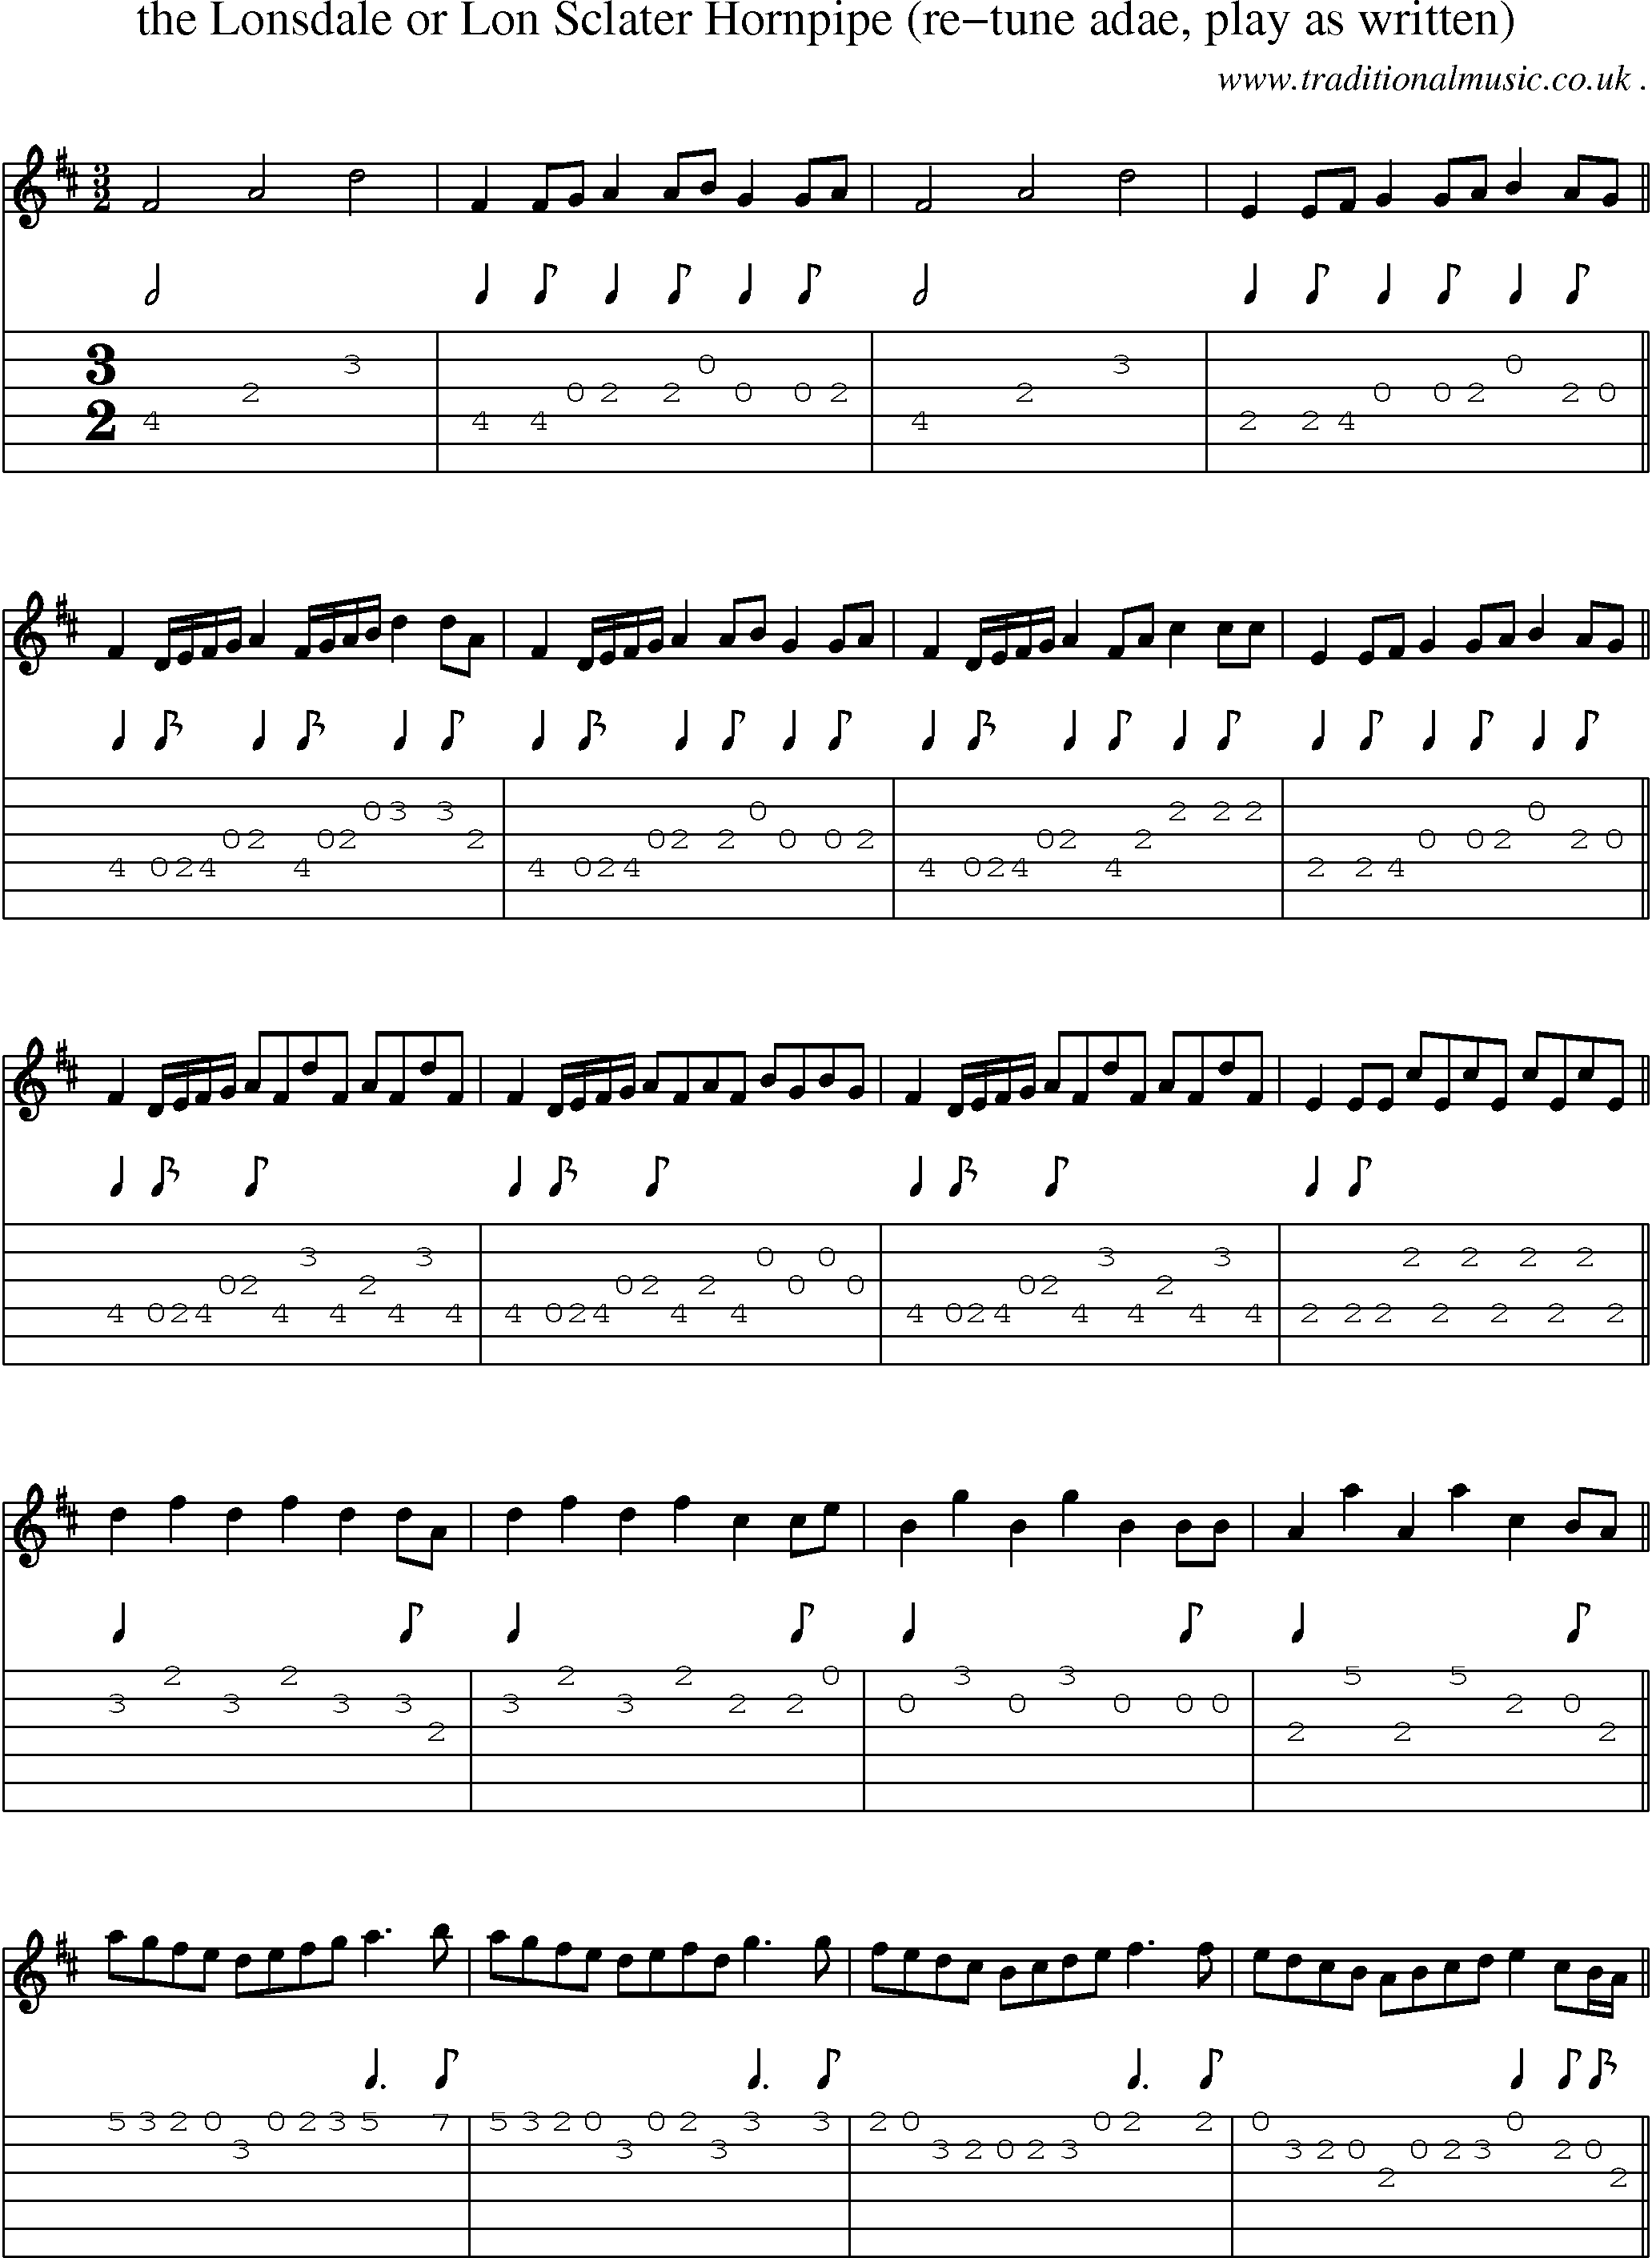 Sheet-Music and Guitar Tabs for The Lonsdale Or Lon Sclater Hornpipe (re-tune Adae Play As Written)